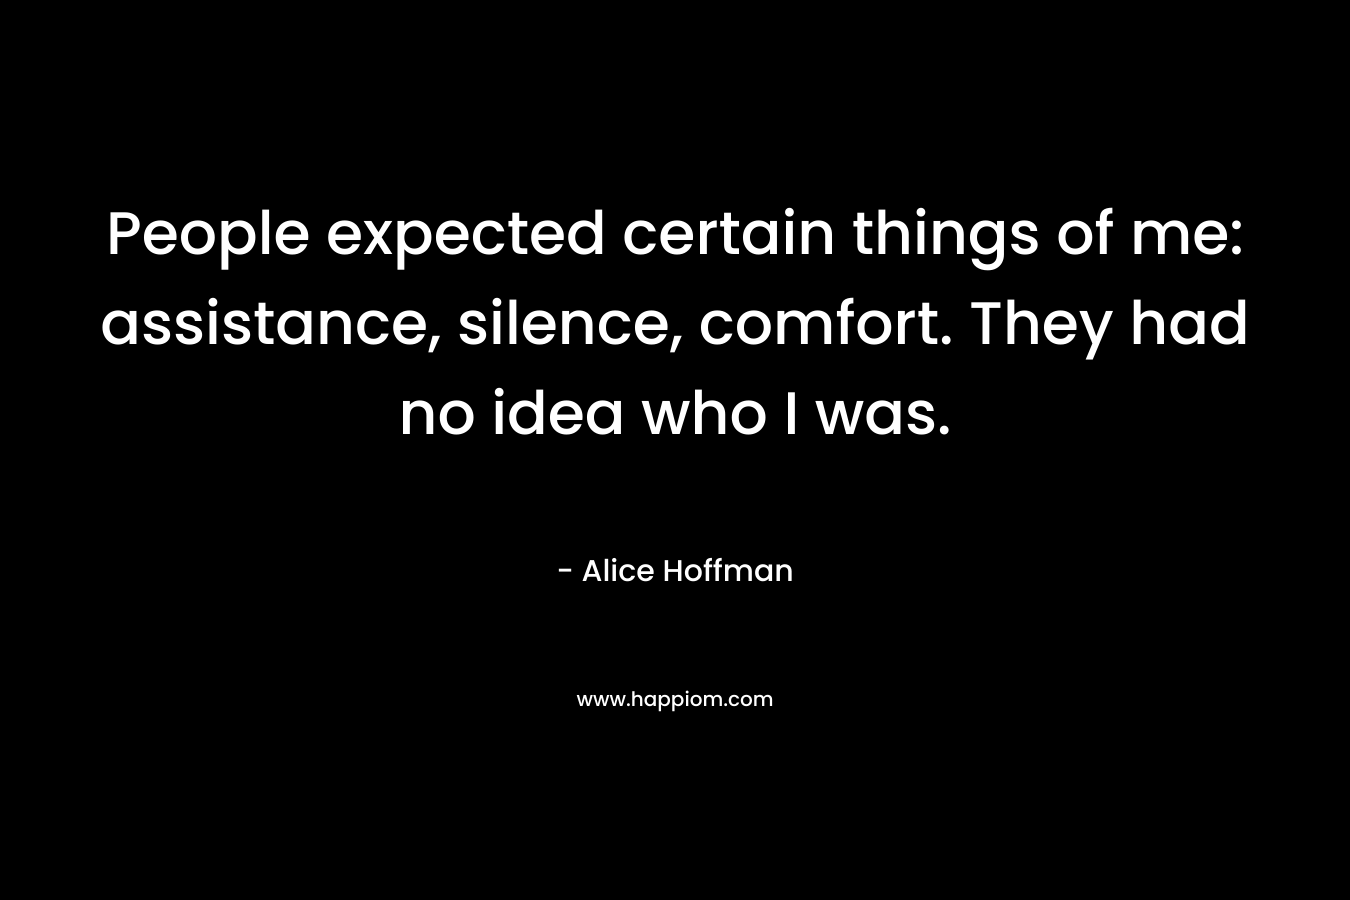 People expected certain things of me: assistance, silence, comfort. They had no idea who I was. – Alice Hoffman